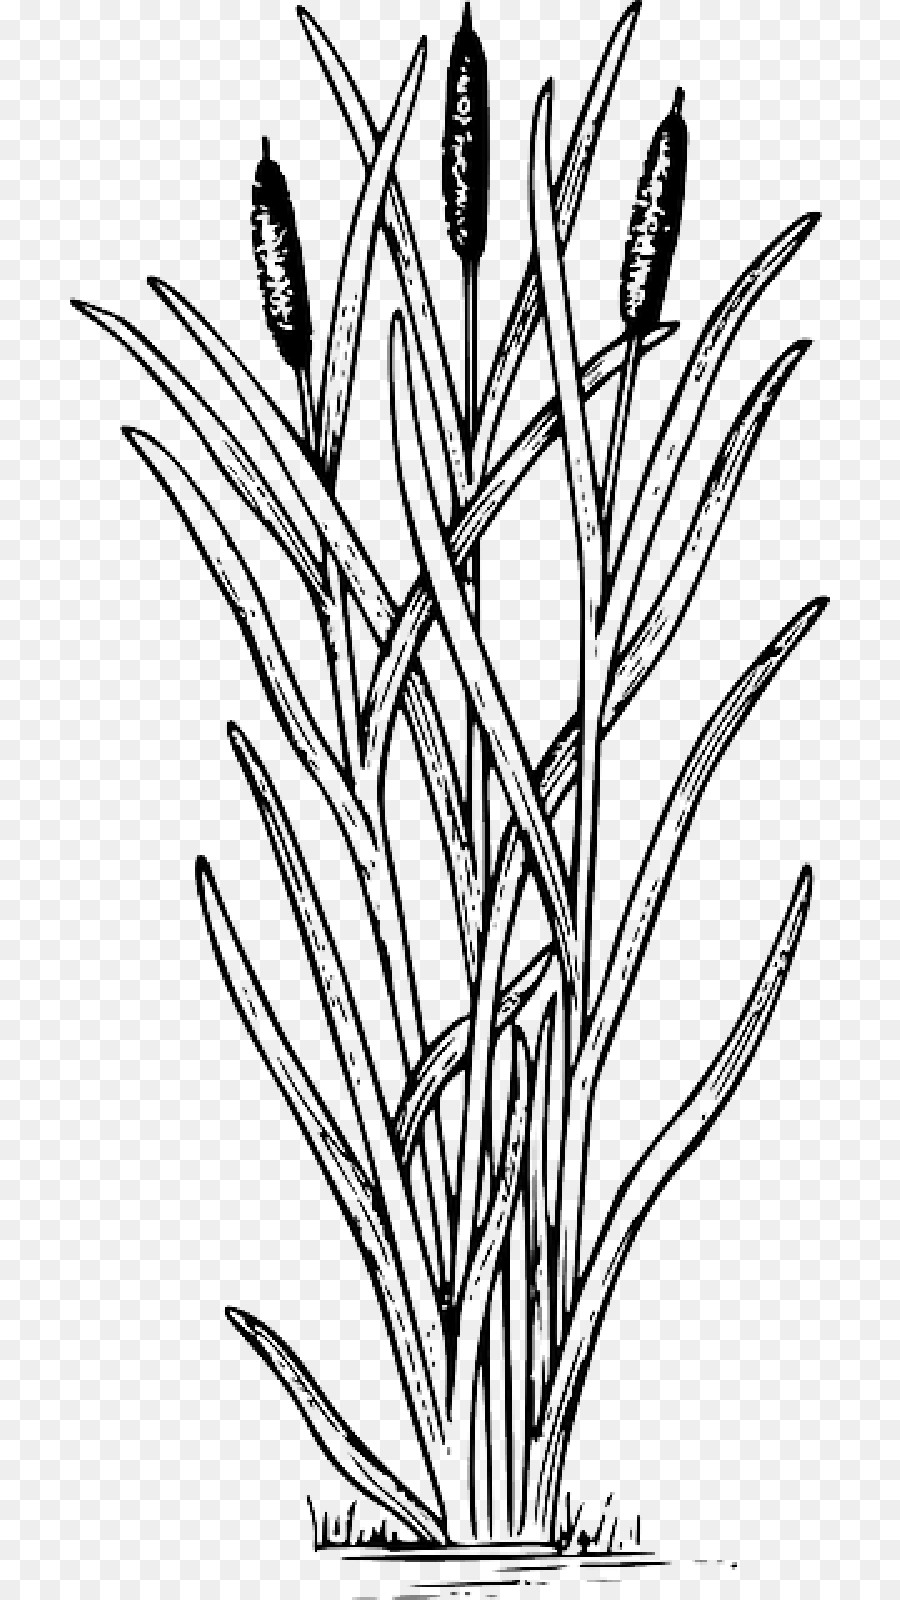 Drawing Cattail Clip art Image - biology png download - 800*1600 - Free Transparent Drawing png Download.